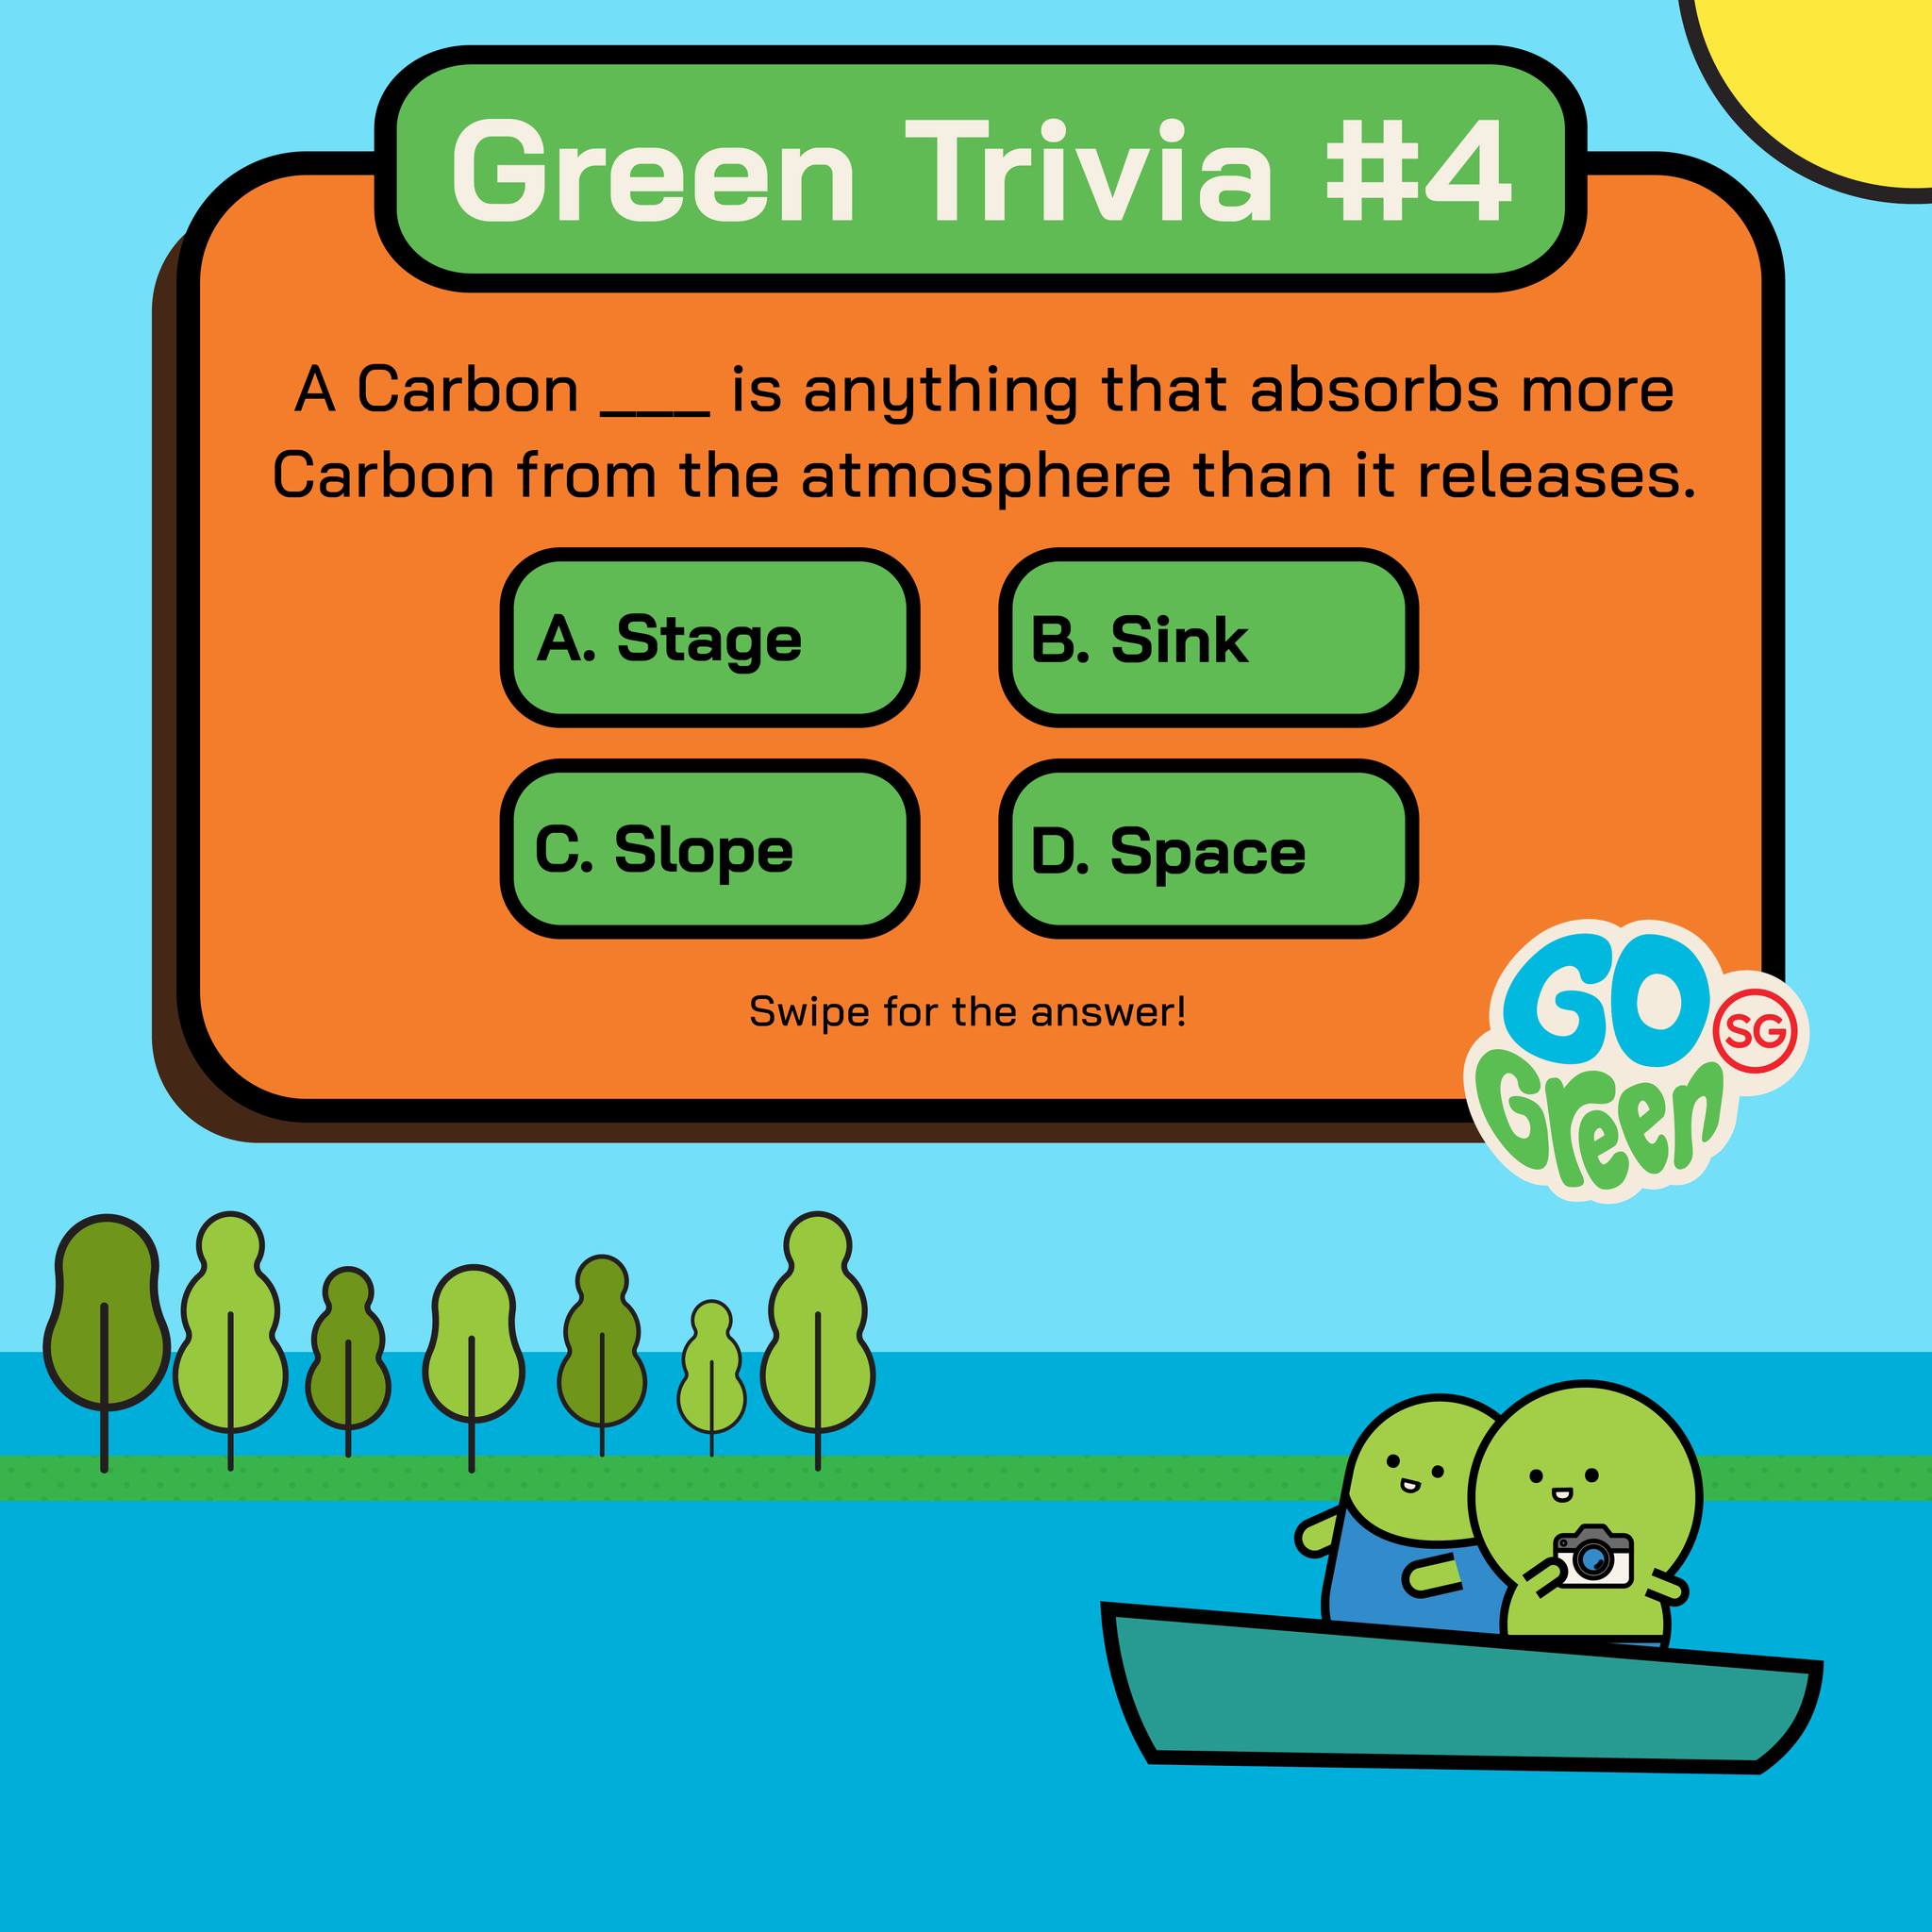 Have Fun Going Green with These Green Trivia!